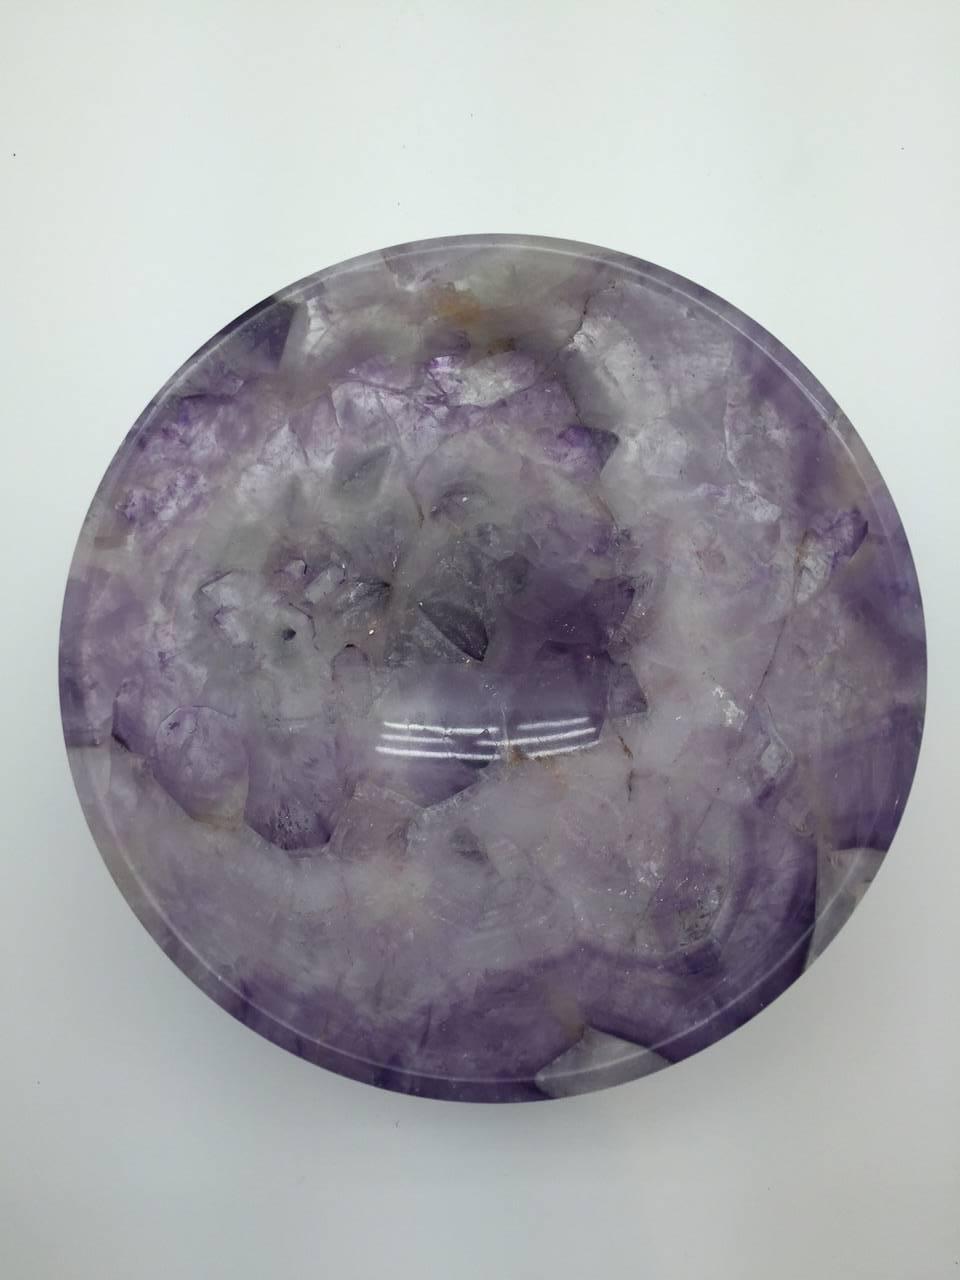 Other Large Hand-Carved Semi-Precious Gemstone Amethyst Bowl from India